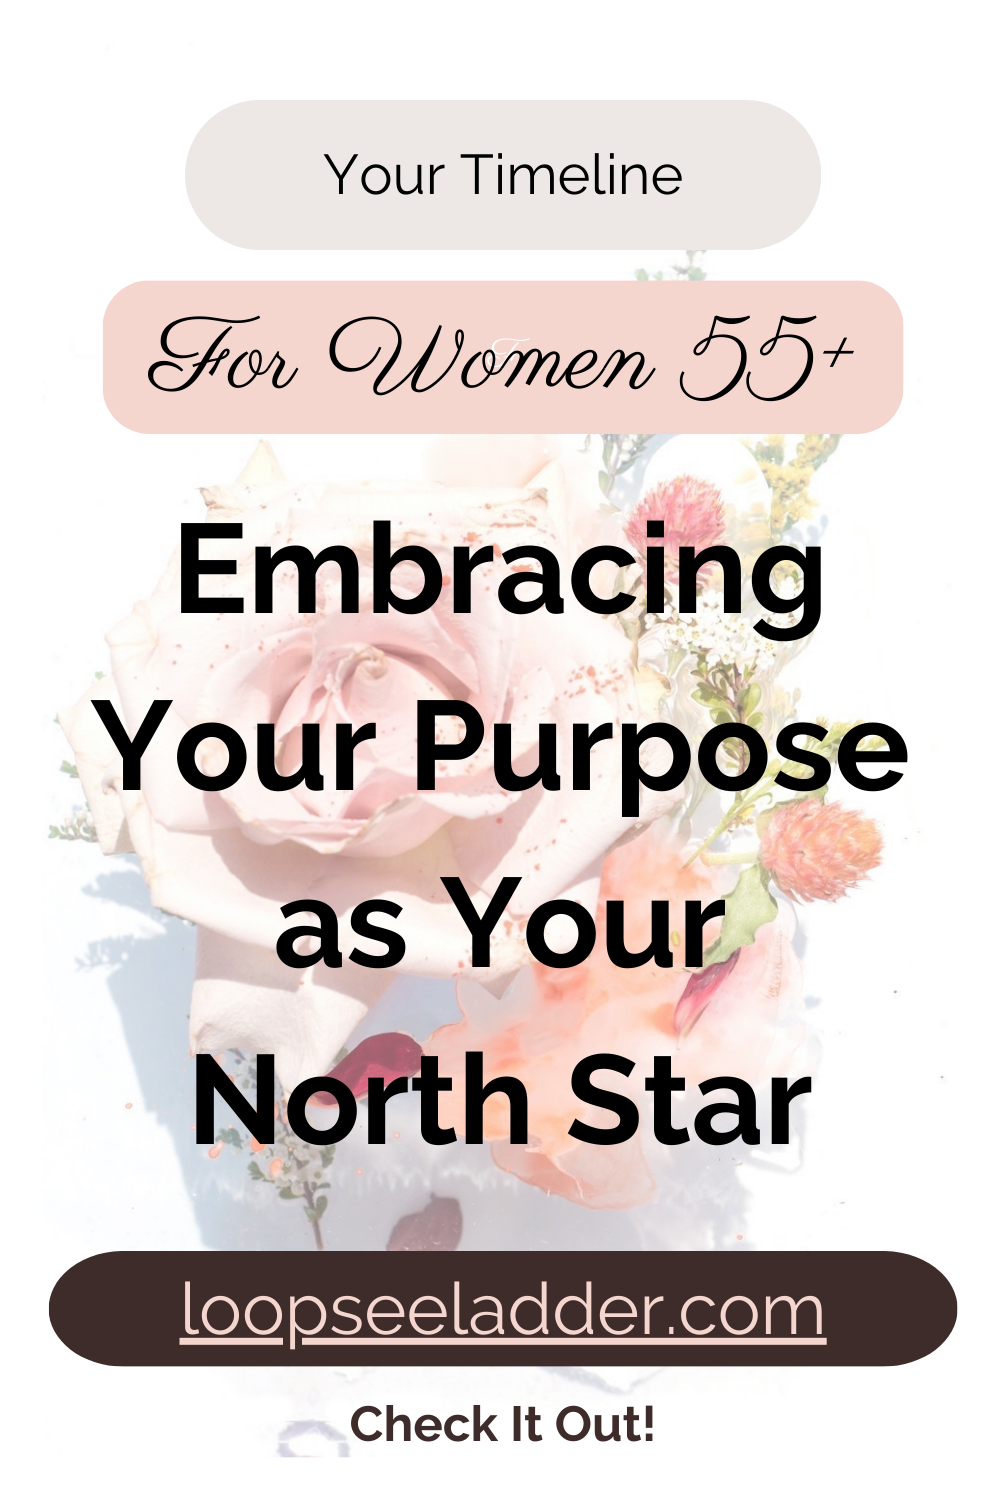 Why Women Over 55 Are Embracing Purpose as Their North Star